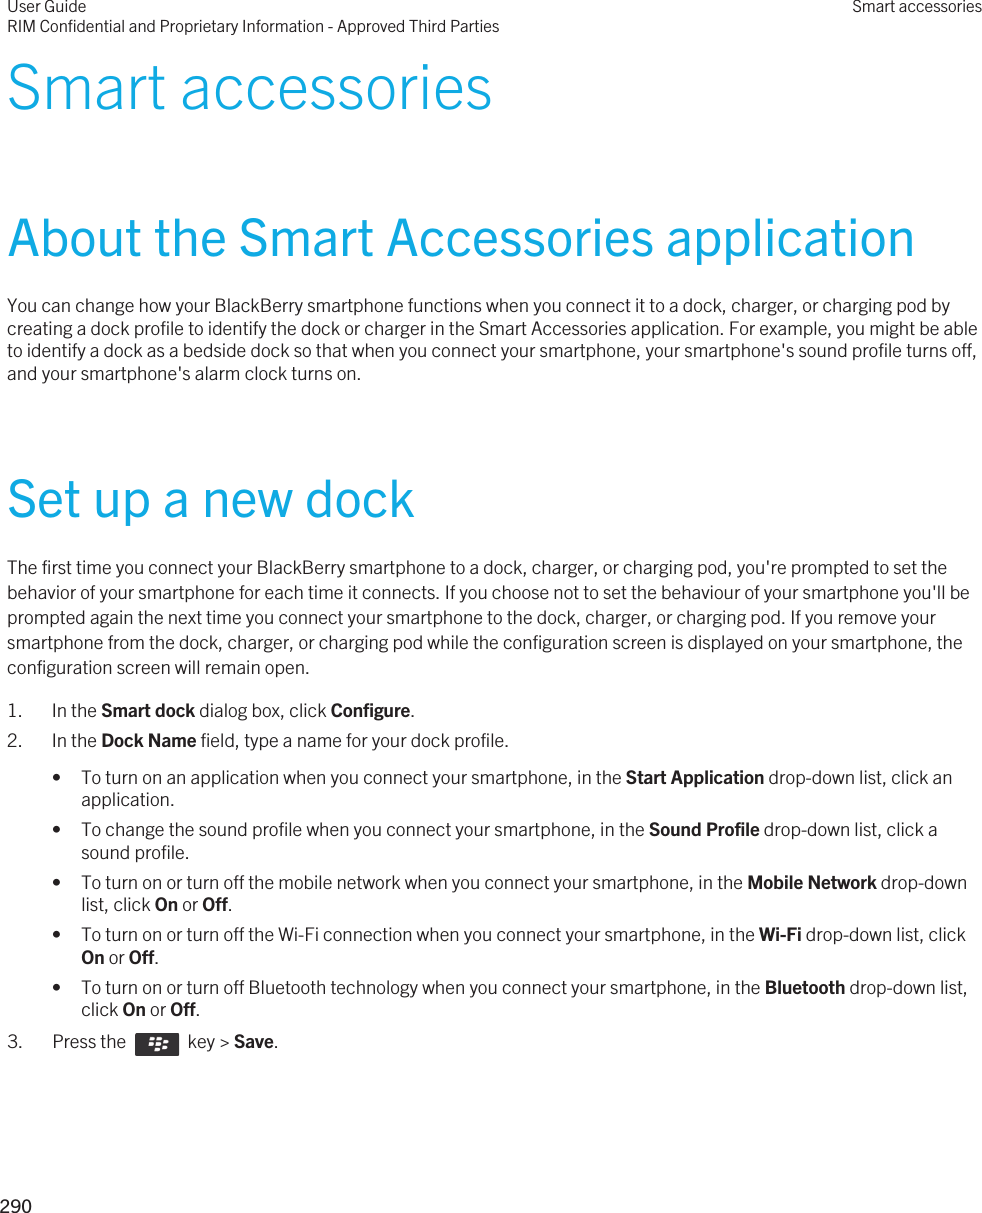 Smart accessoriesAbout the Smart Accessories applicationYou can change how your BlackBerry smartphone functions when you connect it to a dock, charger, or charging pod by creating a dock profile to identify the dock or charger in the Smart Accessories application. For example, you might be able to identify a dock as a bedside dock so that when you connect your smartphone, your smartphone&apos;s sound profile turns off, and your smartphone&apos;s alarm clock turns on.Set up a new dockThe first time you connect your BlackBerry smartphone to a dock, charger, or charging pod, you&apos;re prompted to set the behavior of your smartphone for each time it connects. If you choose not to set the behaviour of your smartphone you&apos;ll be prompted again the next time you connect your smartphone to the dock, charger, or charging pod. If you remove your smartphone from the dock, charger, or charging pod while the configuration screen is displayed on your smartphone, the configuration screen will remain open.1. In the Smart dock dialog box, click Configure.2. In the Dock Name field, type a name for your dock profile.• To turn on an application when you connect your smartphone, in the Start Application drop-down list, click an application.• To change the sound profile when you connect your smartphone, in the Sound Profile drop-down list, click a sound profile.• To turn on or turn off the mobile network when you connect your smartphone, in the Mobile Network drop-down list, click On or Off.• To turn on or turn off the Wi-Fi connection when you connect your smartphone, in the Wi-Fi drop-down list, click On or Off.• To turn on or turn off Bluetooth technology when you connect your smartphone, in the Bluetooth drop-down list, click On or Off.3.  Press the    key &gt; Save. User GuideRIM Confidential and Proprietary Information - Approved Third PartiesSmart accessories290 